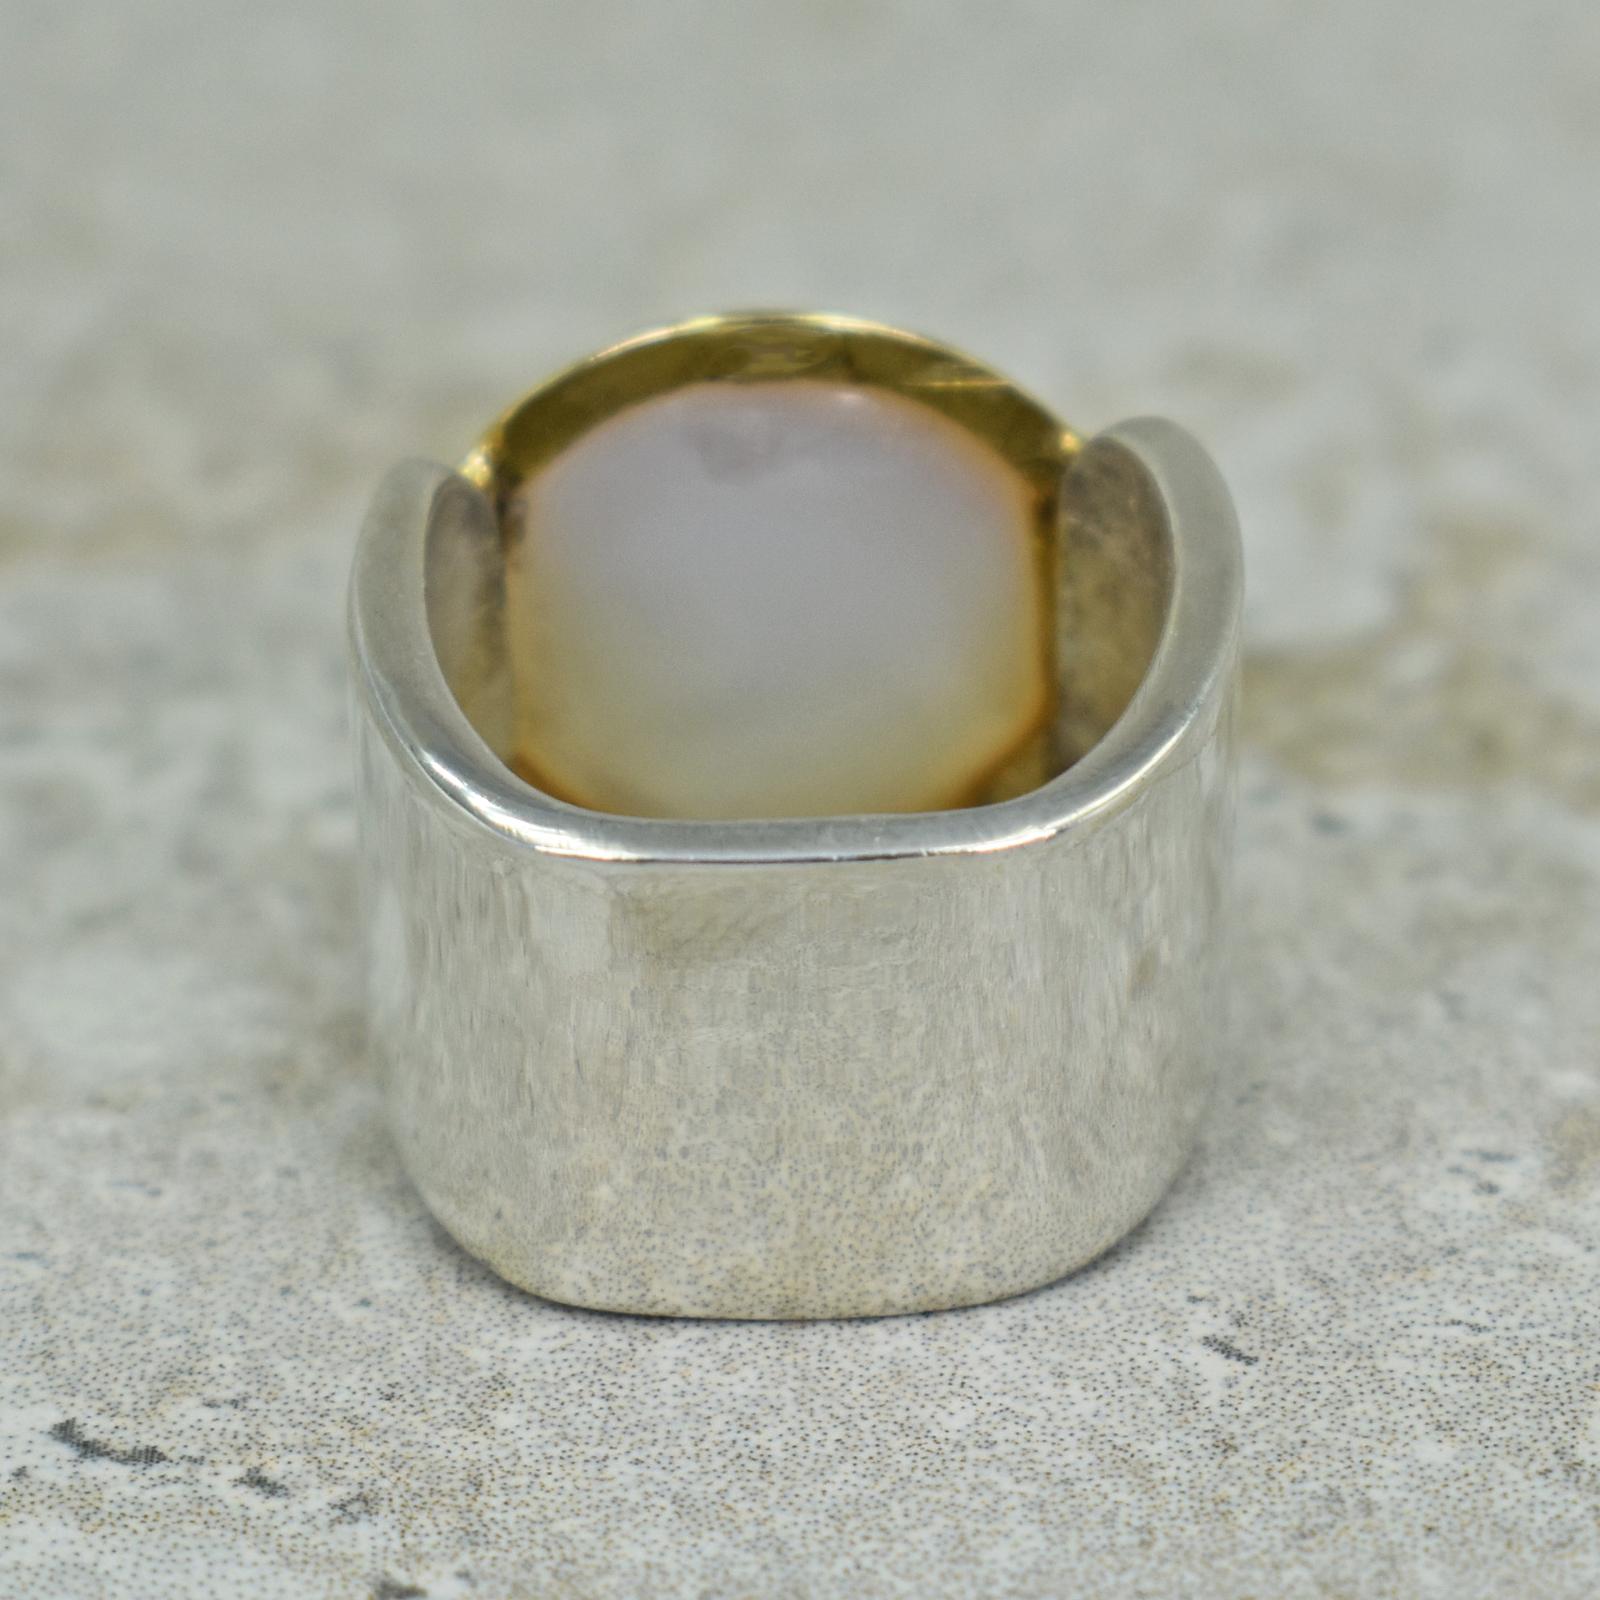 Cabochon Mabé Pearl, 14 Karat Gold and Sterling Silver Contemporary Cocktail Ring